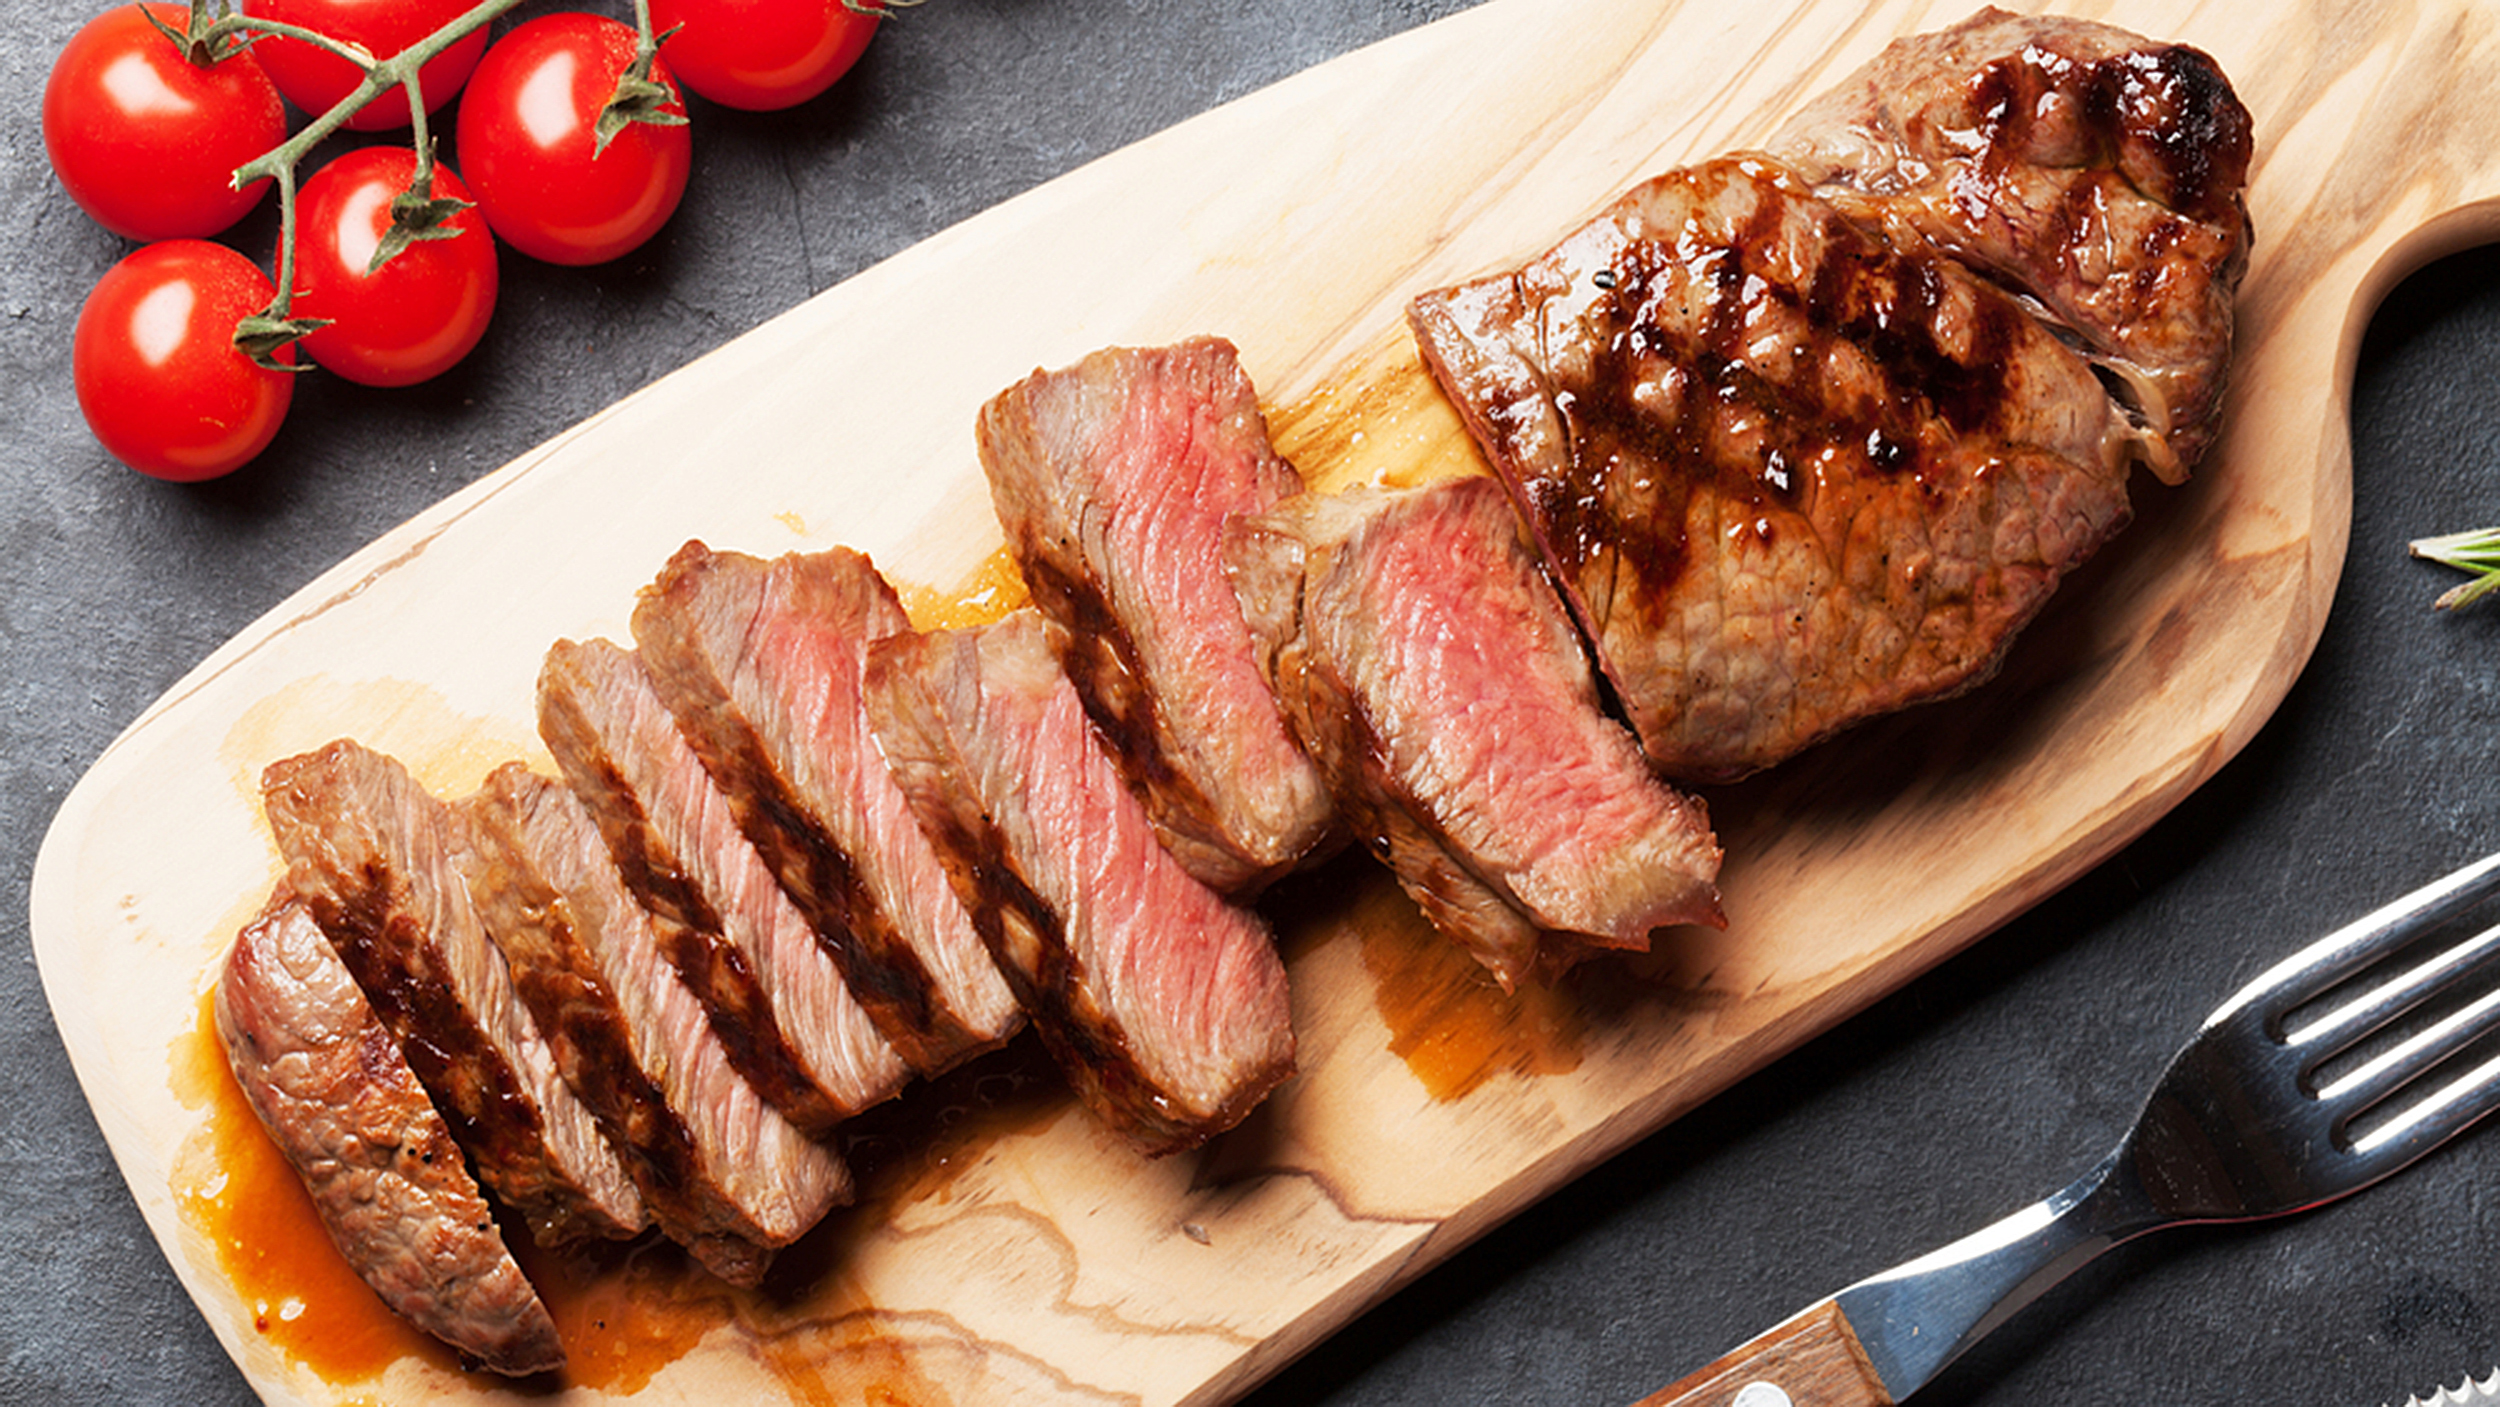 How to grill a steak: 15 tips from grilling guru Tim Love - TODAY.com